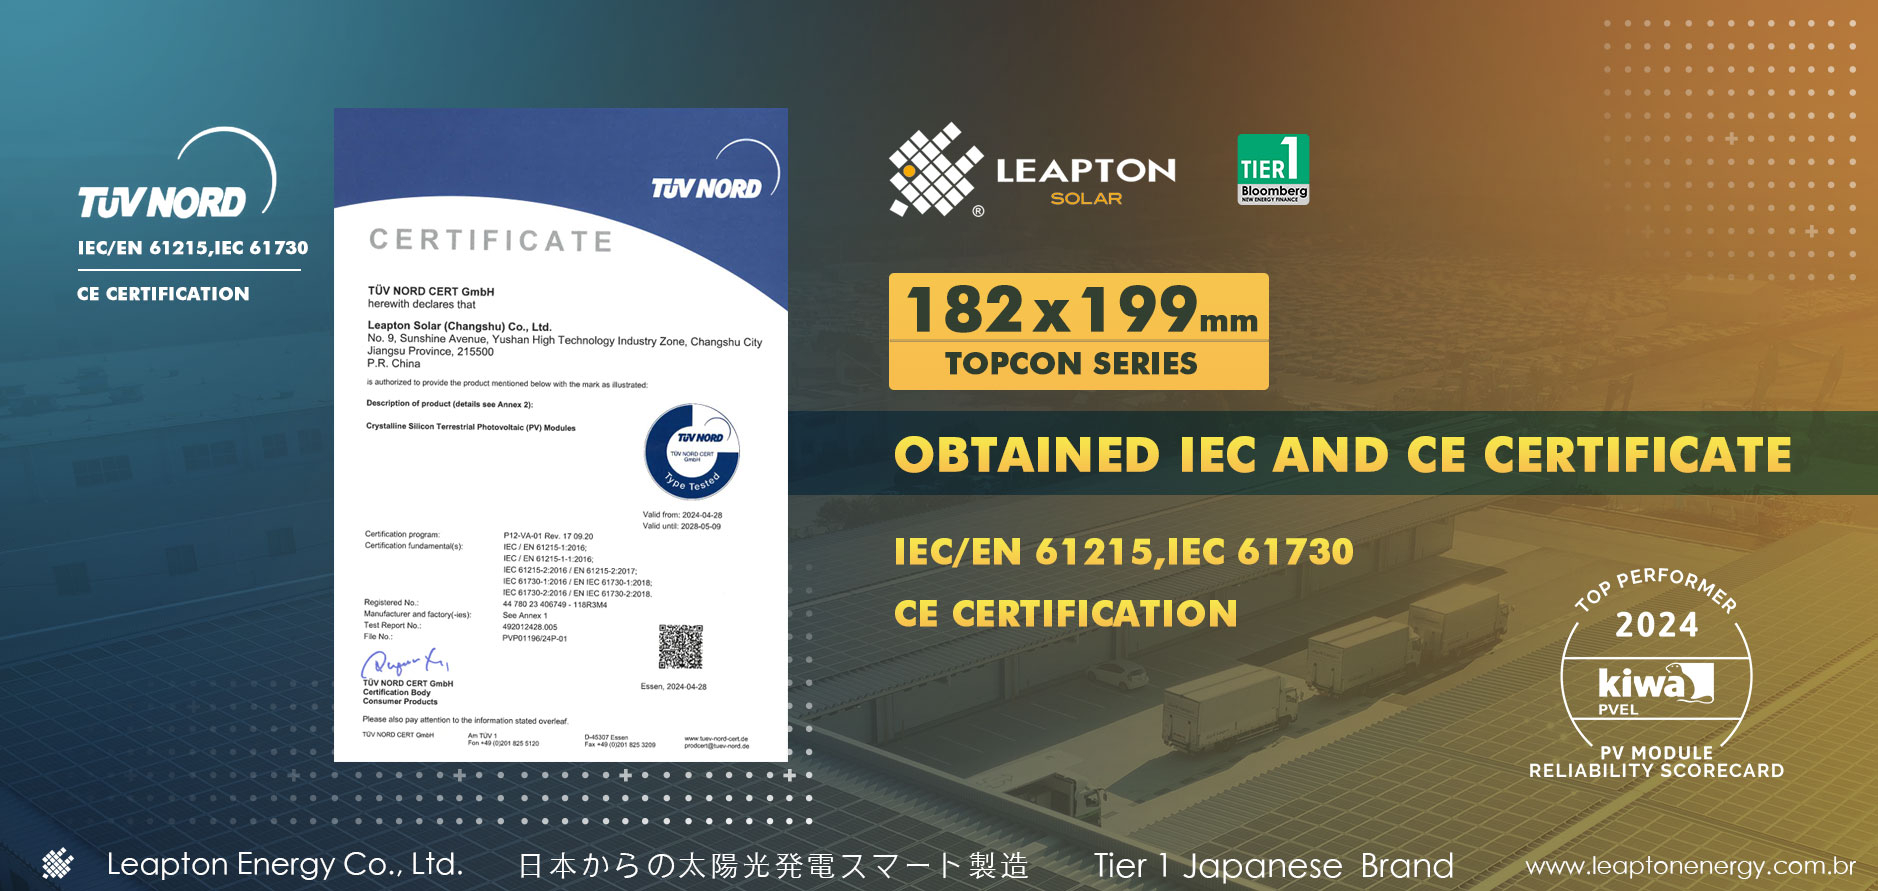 Leapton Energy 182x199 TOPCon series obtained IEC/CE certificate